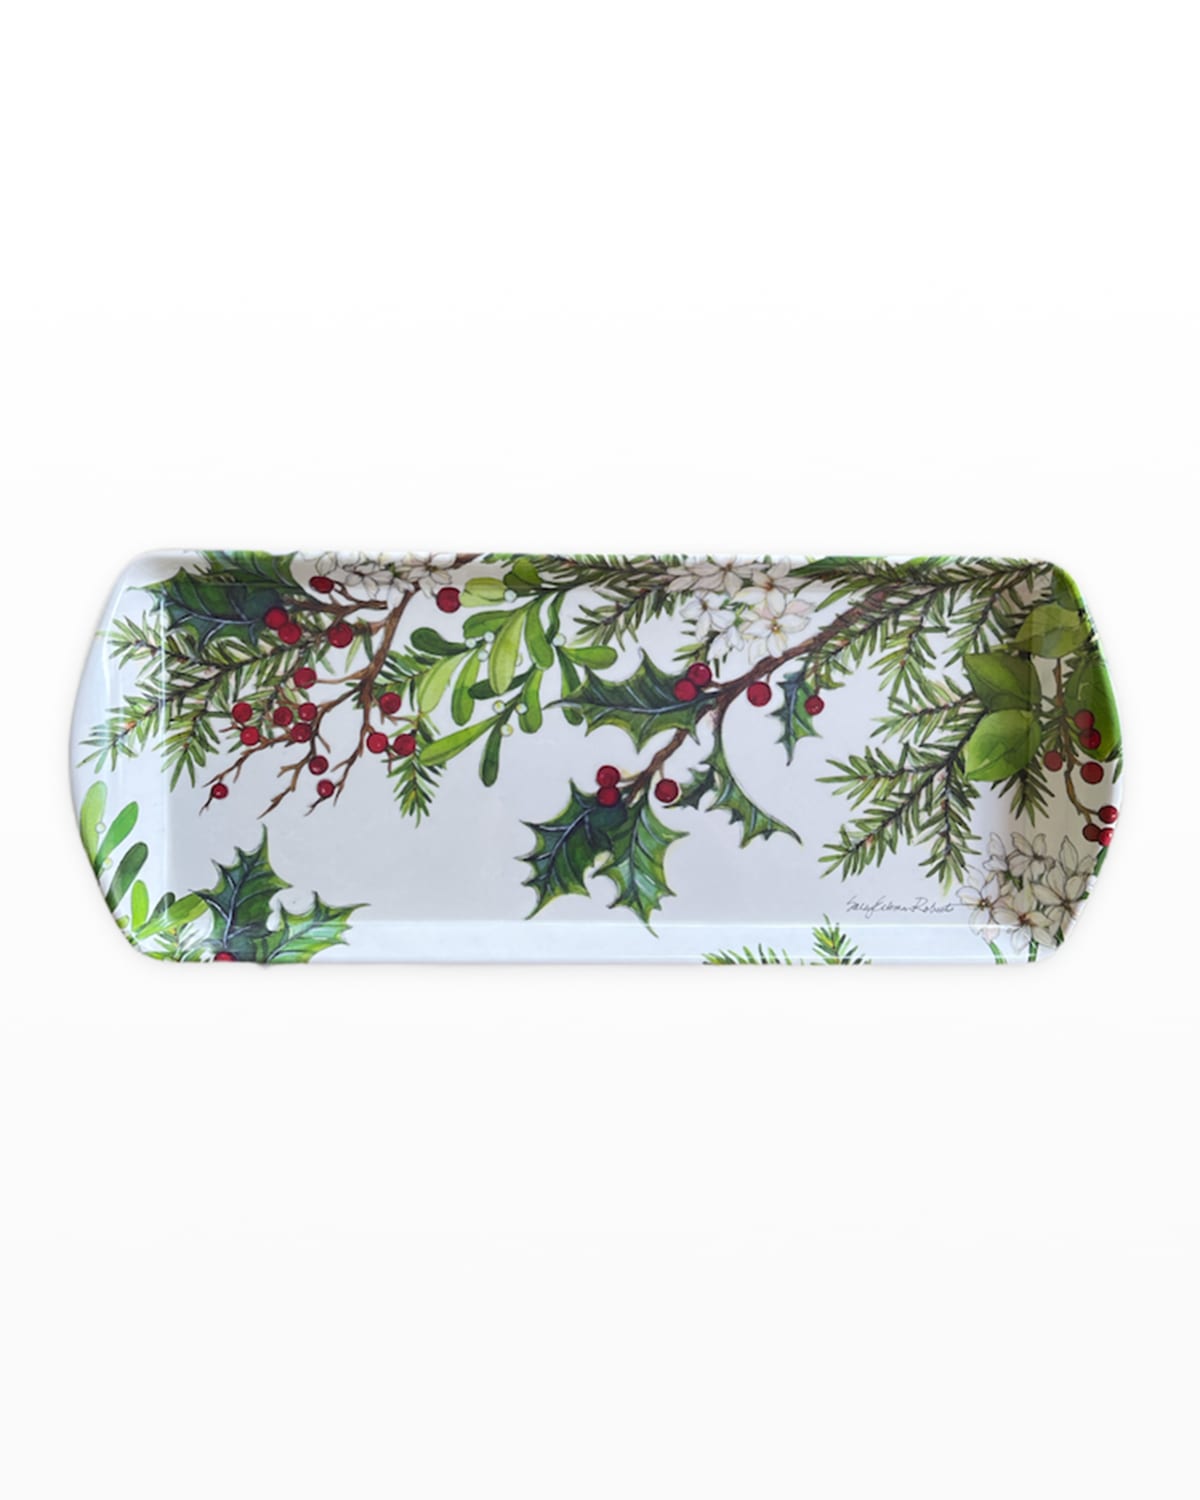 Shop Bamboo Table Balsam/berries Loaf Tray In Red And Green